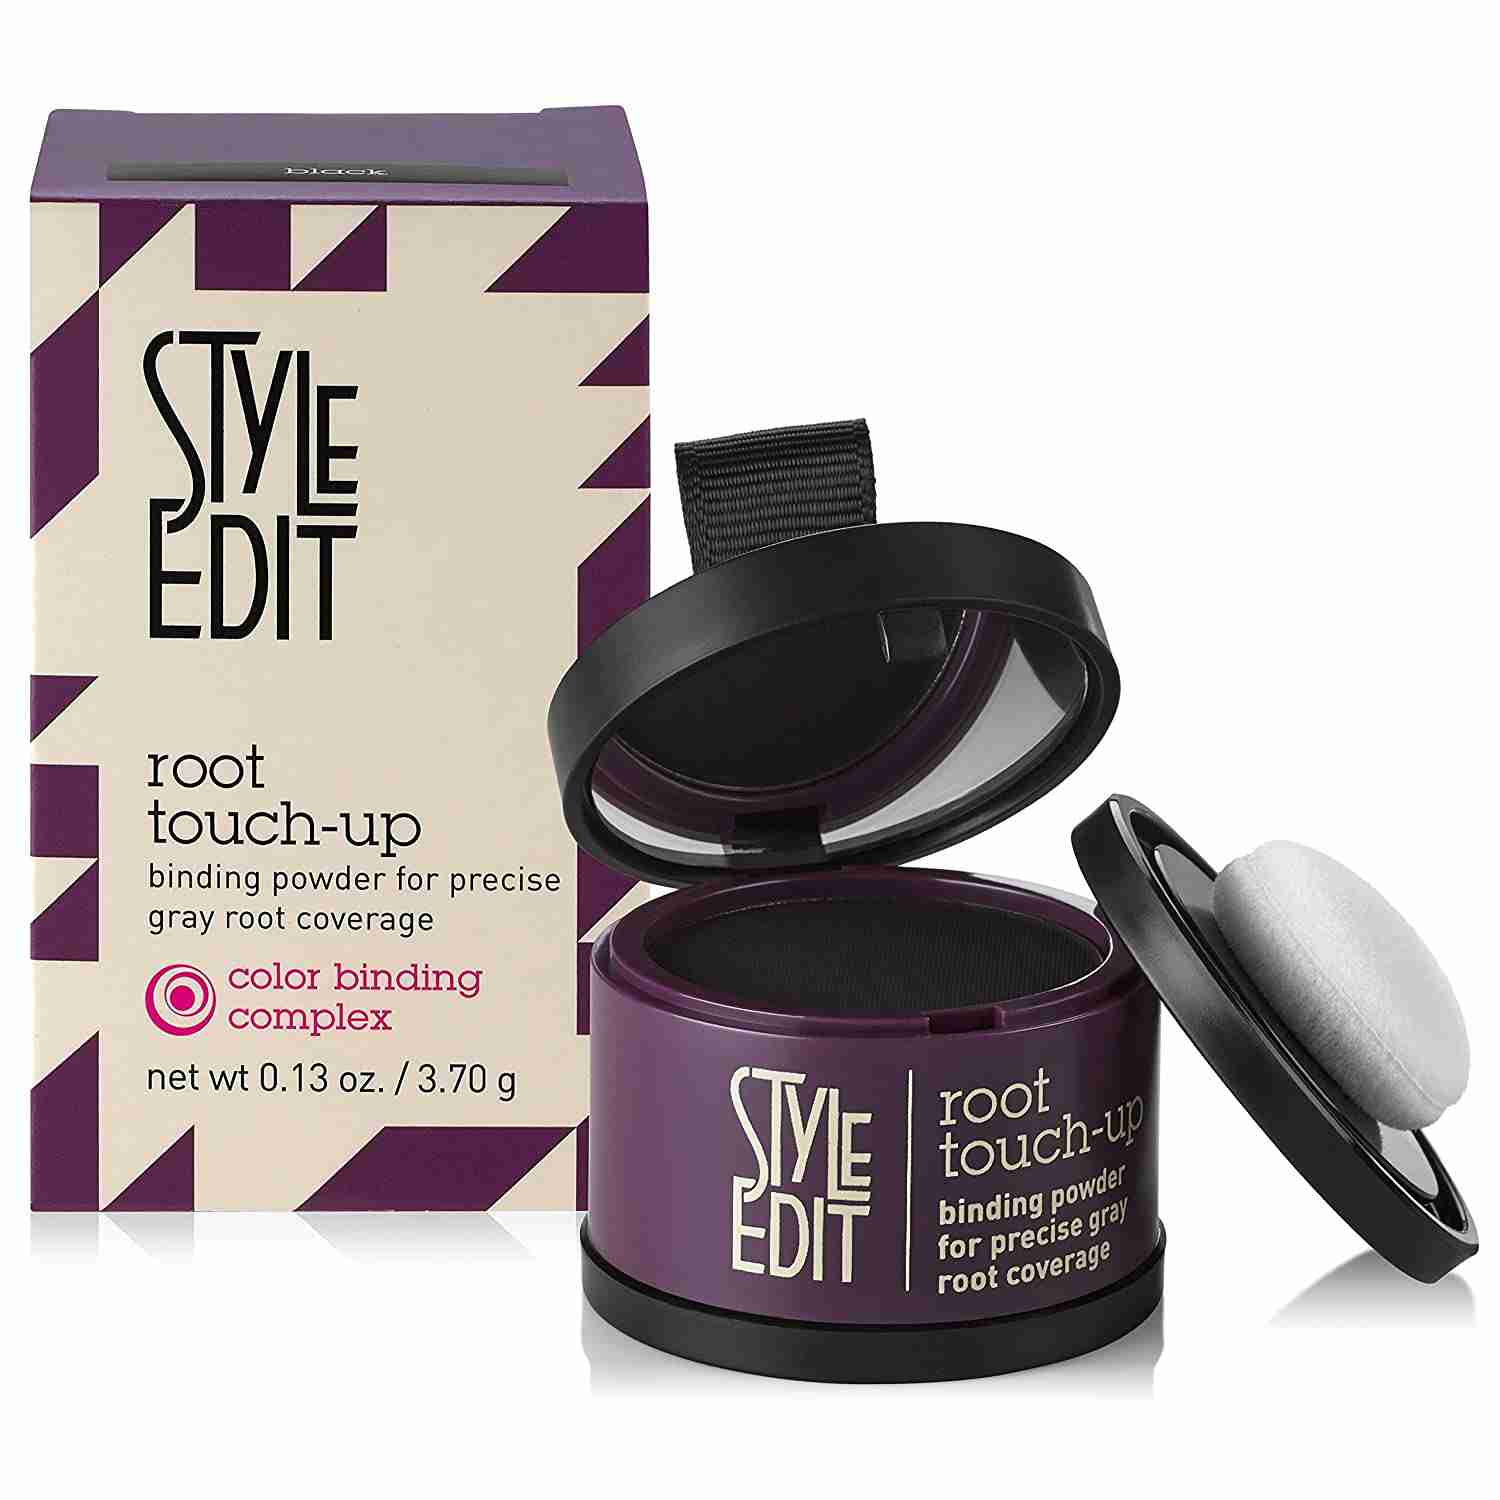 root-touch-up-powder with cash back rebate